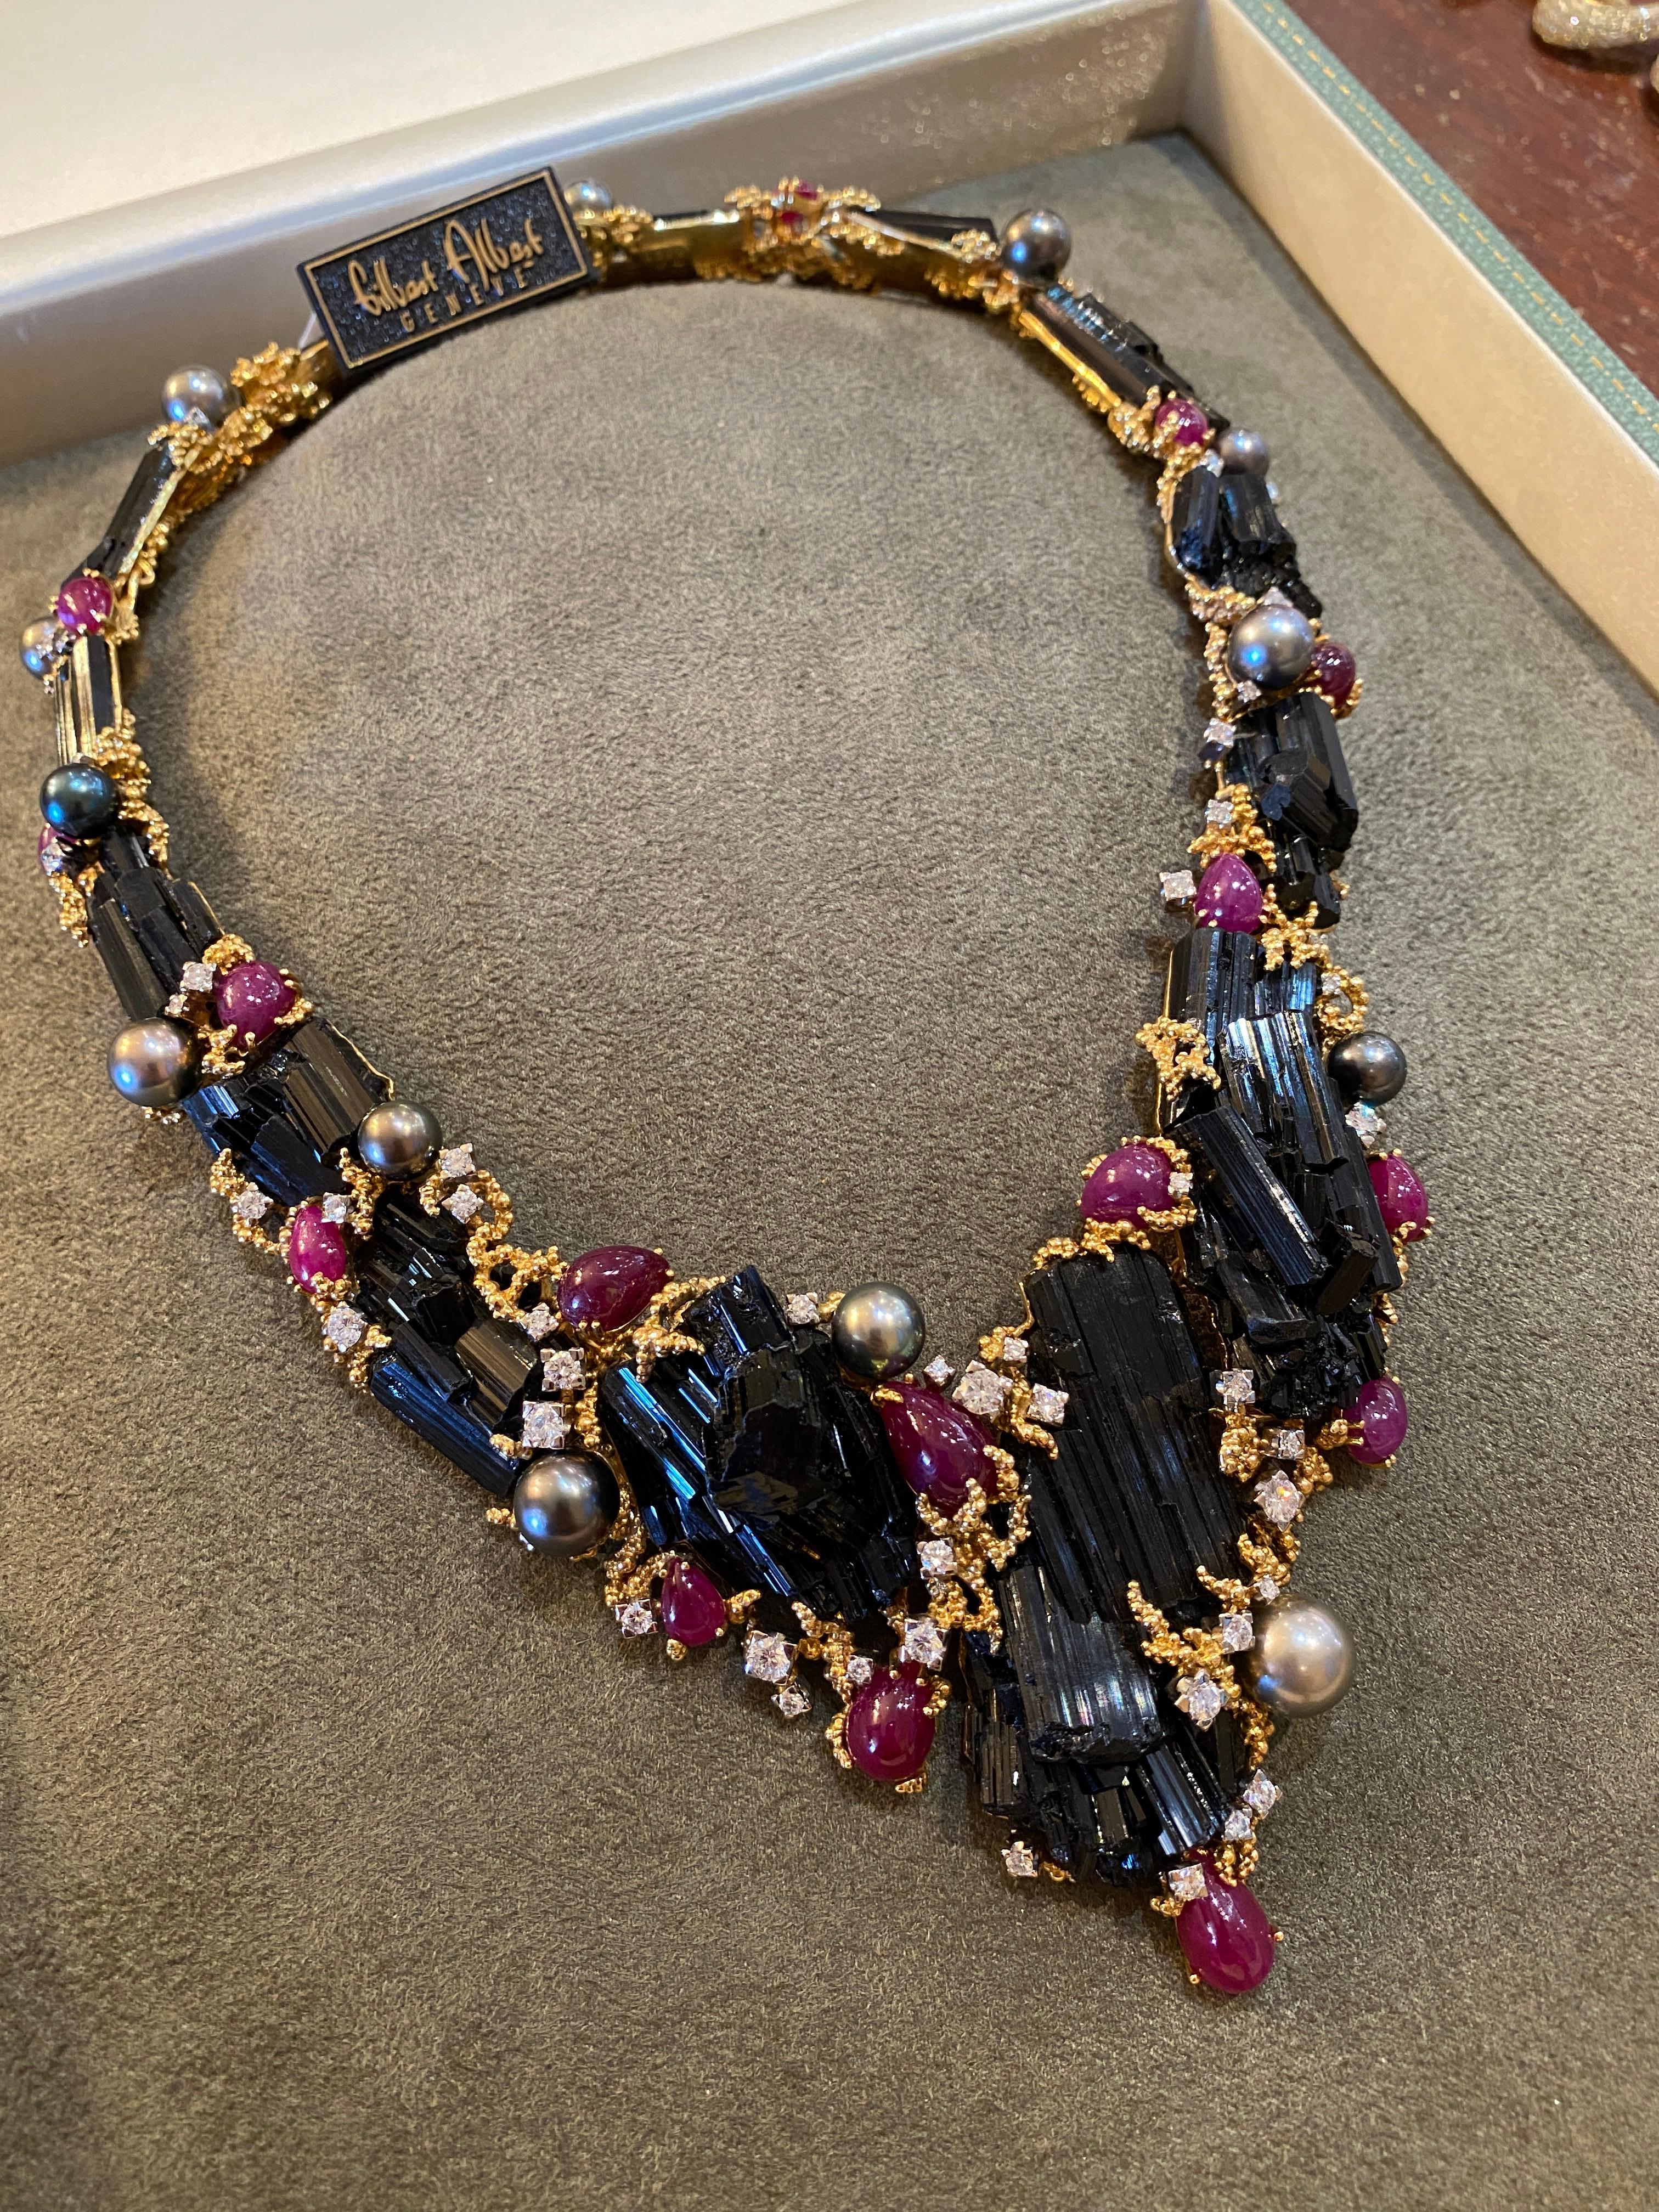 Black Tourmaline, Ruby and Diamond Statement Necklace
in 18k Yellow Gold
by Gilbert Albert (Geneva)

features
Large Black Tourmaline Crystals set in textured 18k Yellow Gold
with Ruby Cabochons, Diamonds and Black Tahitian Pearls

5.00 carats of